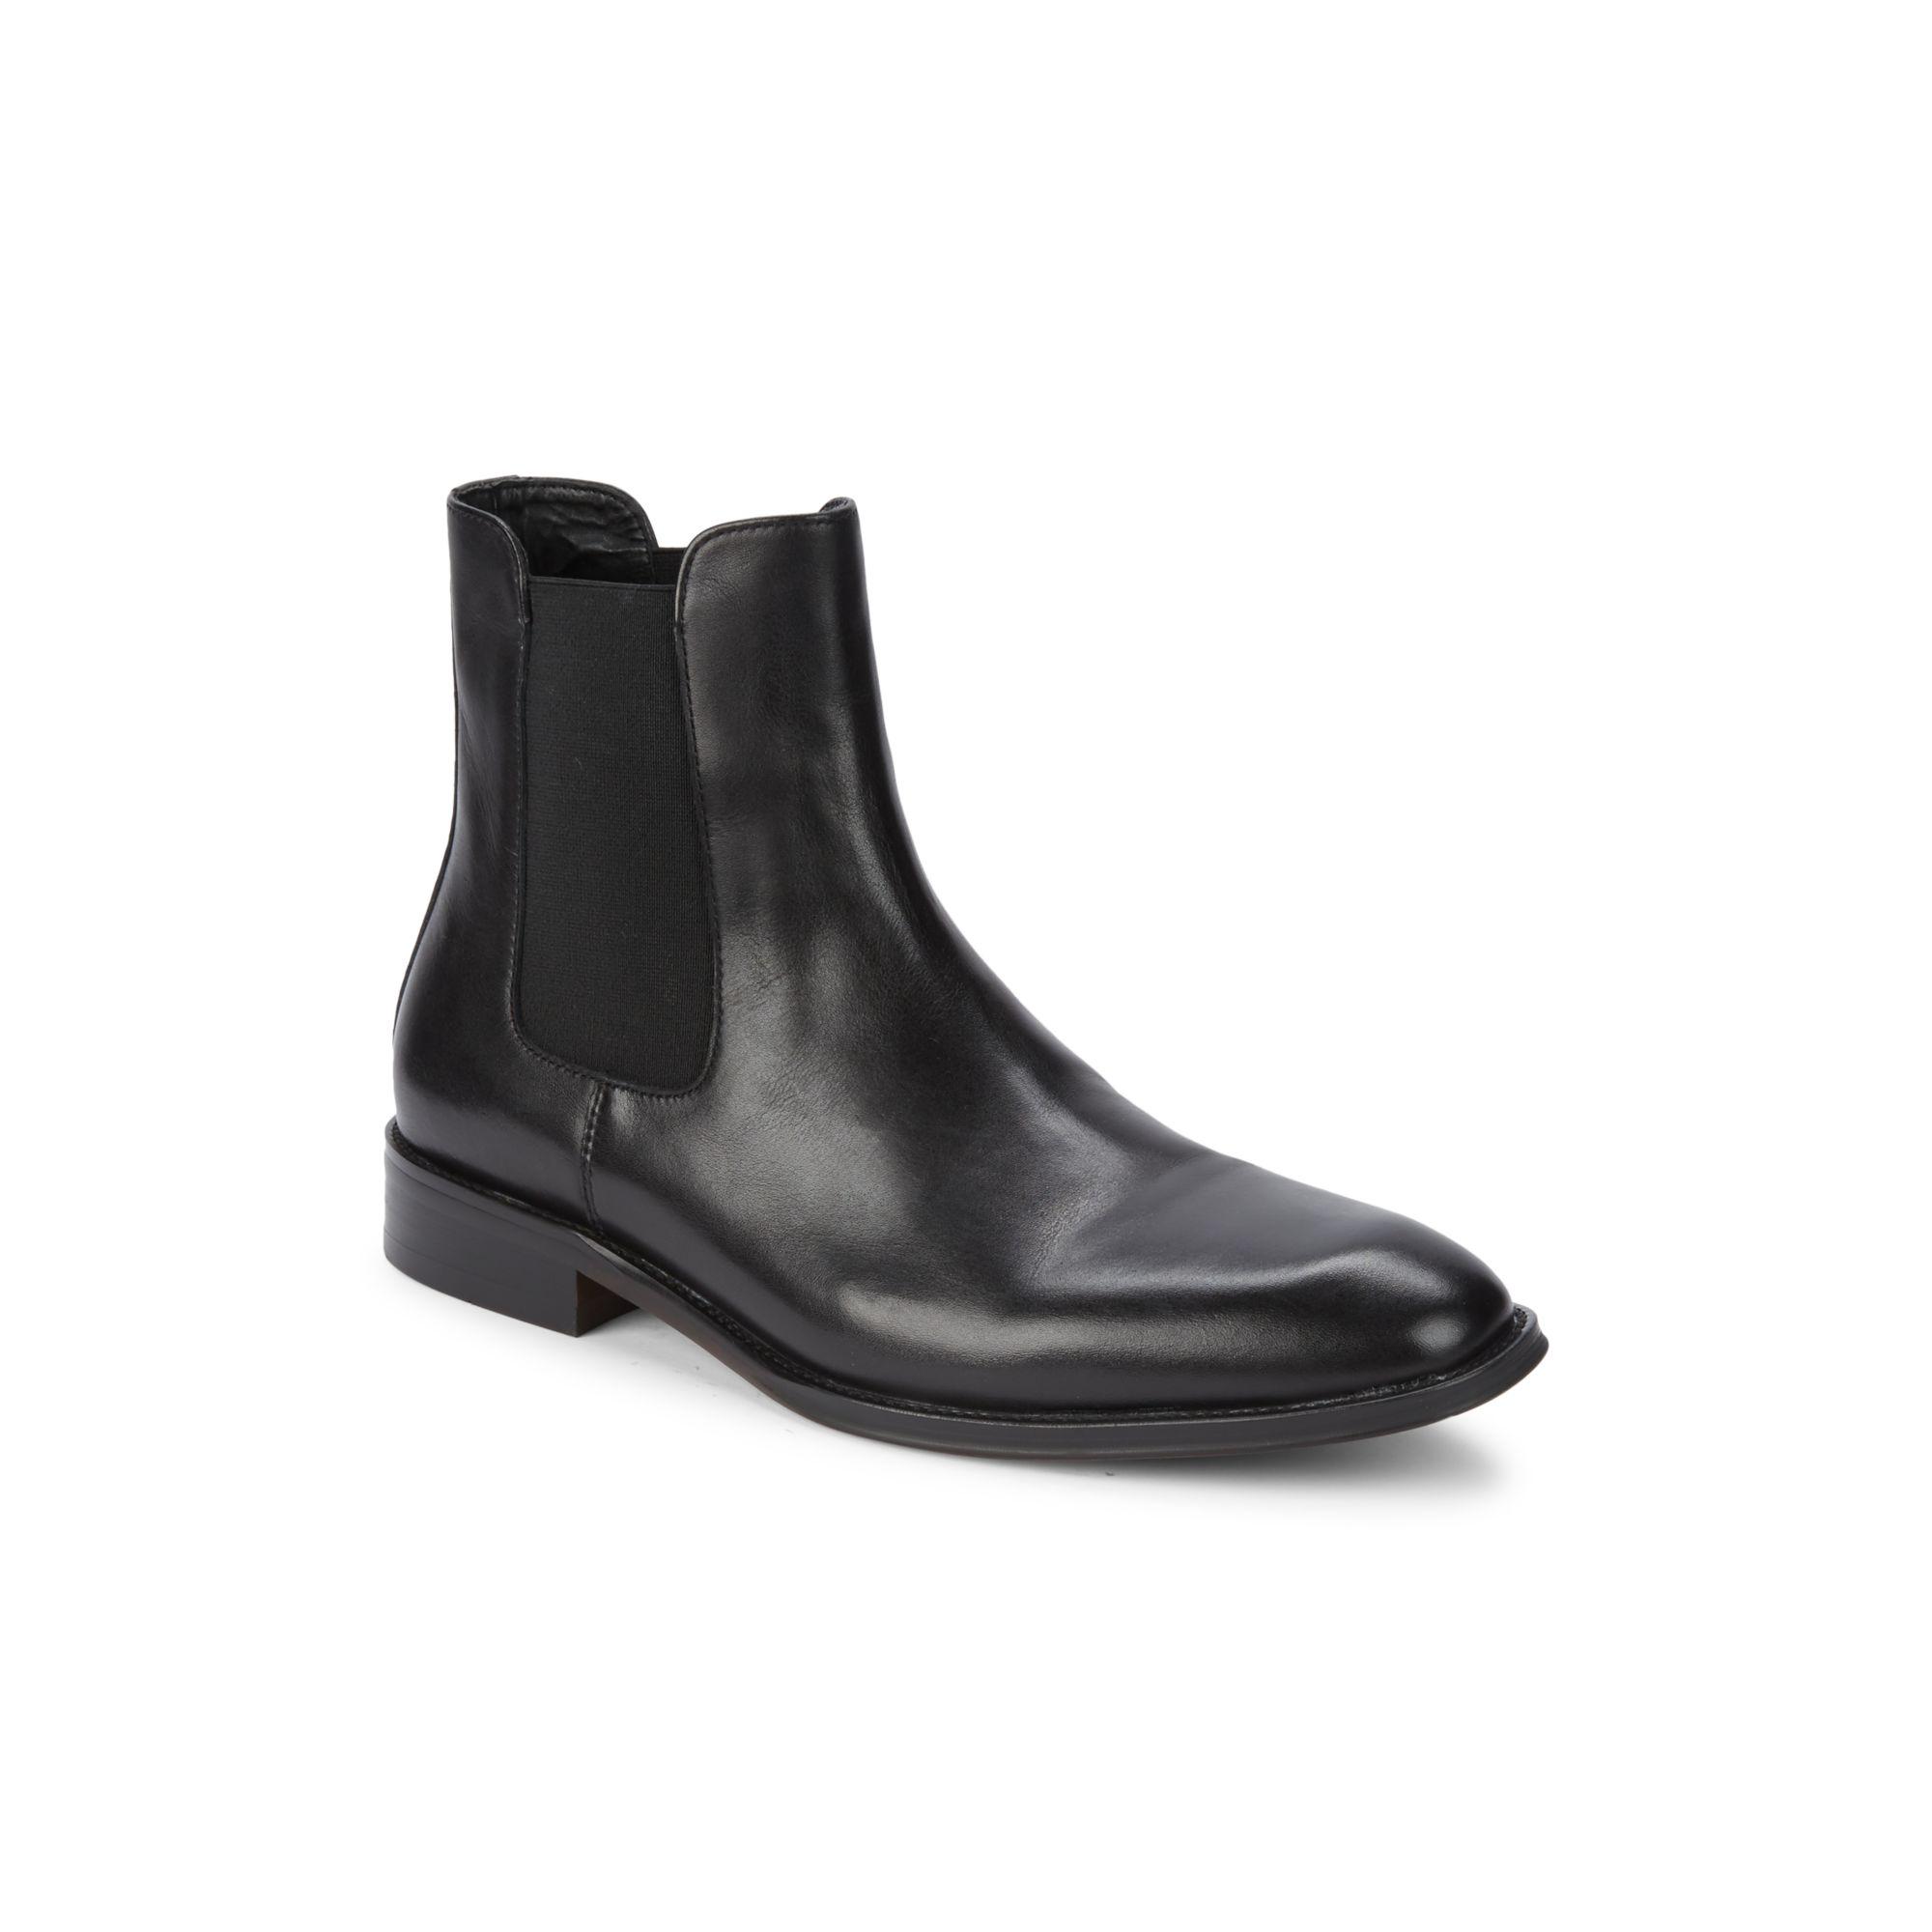 Saks Fifth Avenue Leather Adriano Ankle Boots in Black for Men - Lyst